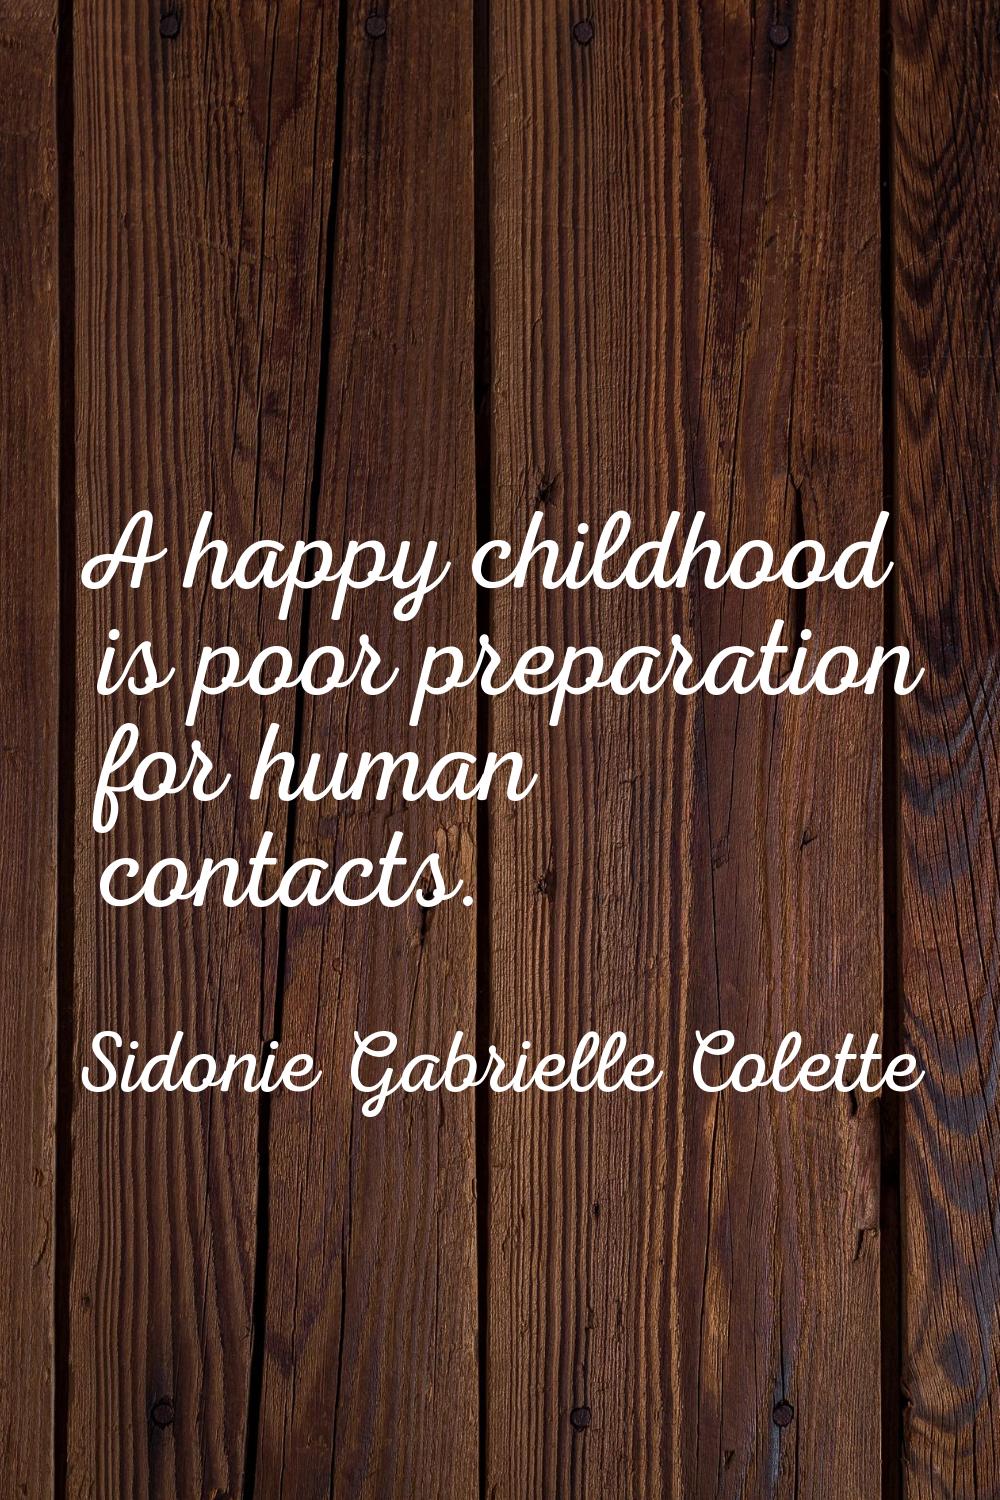 A happy childhood is poor preparation for human contacts.